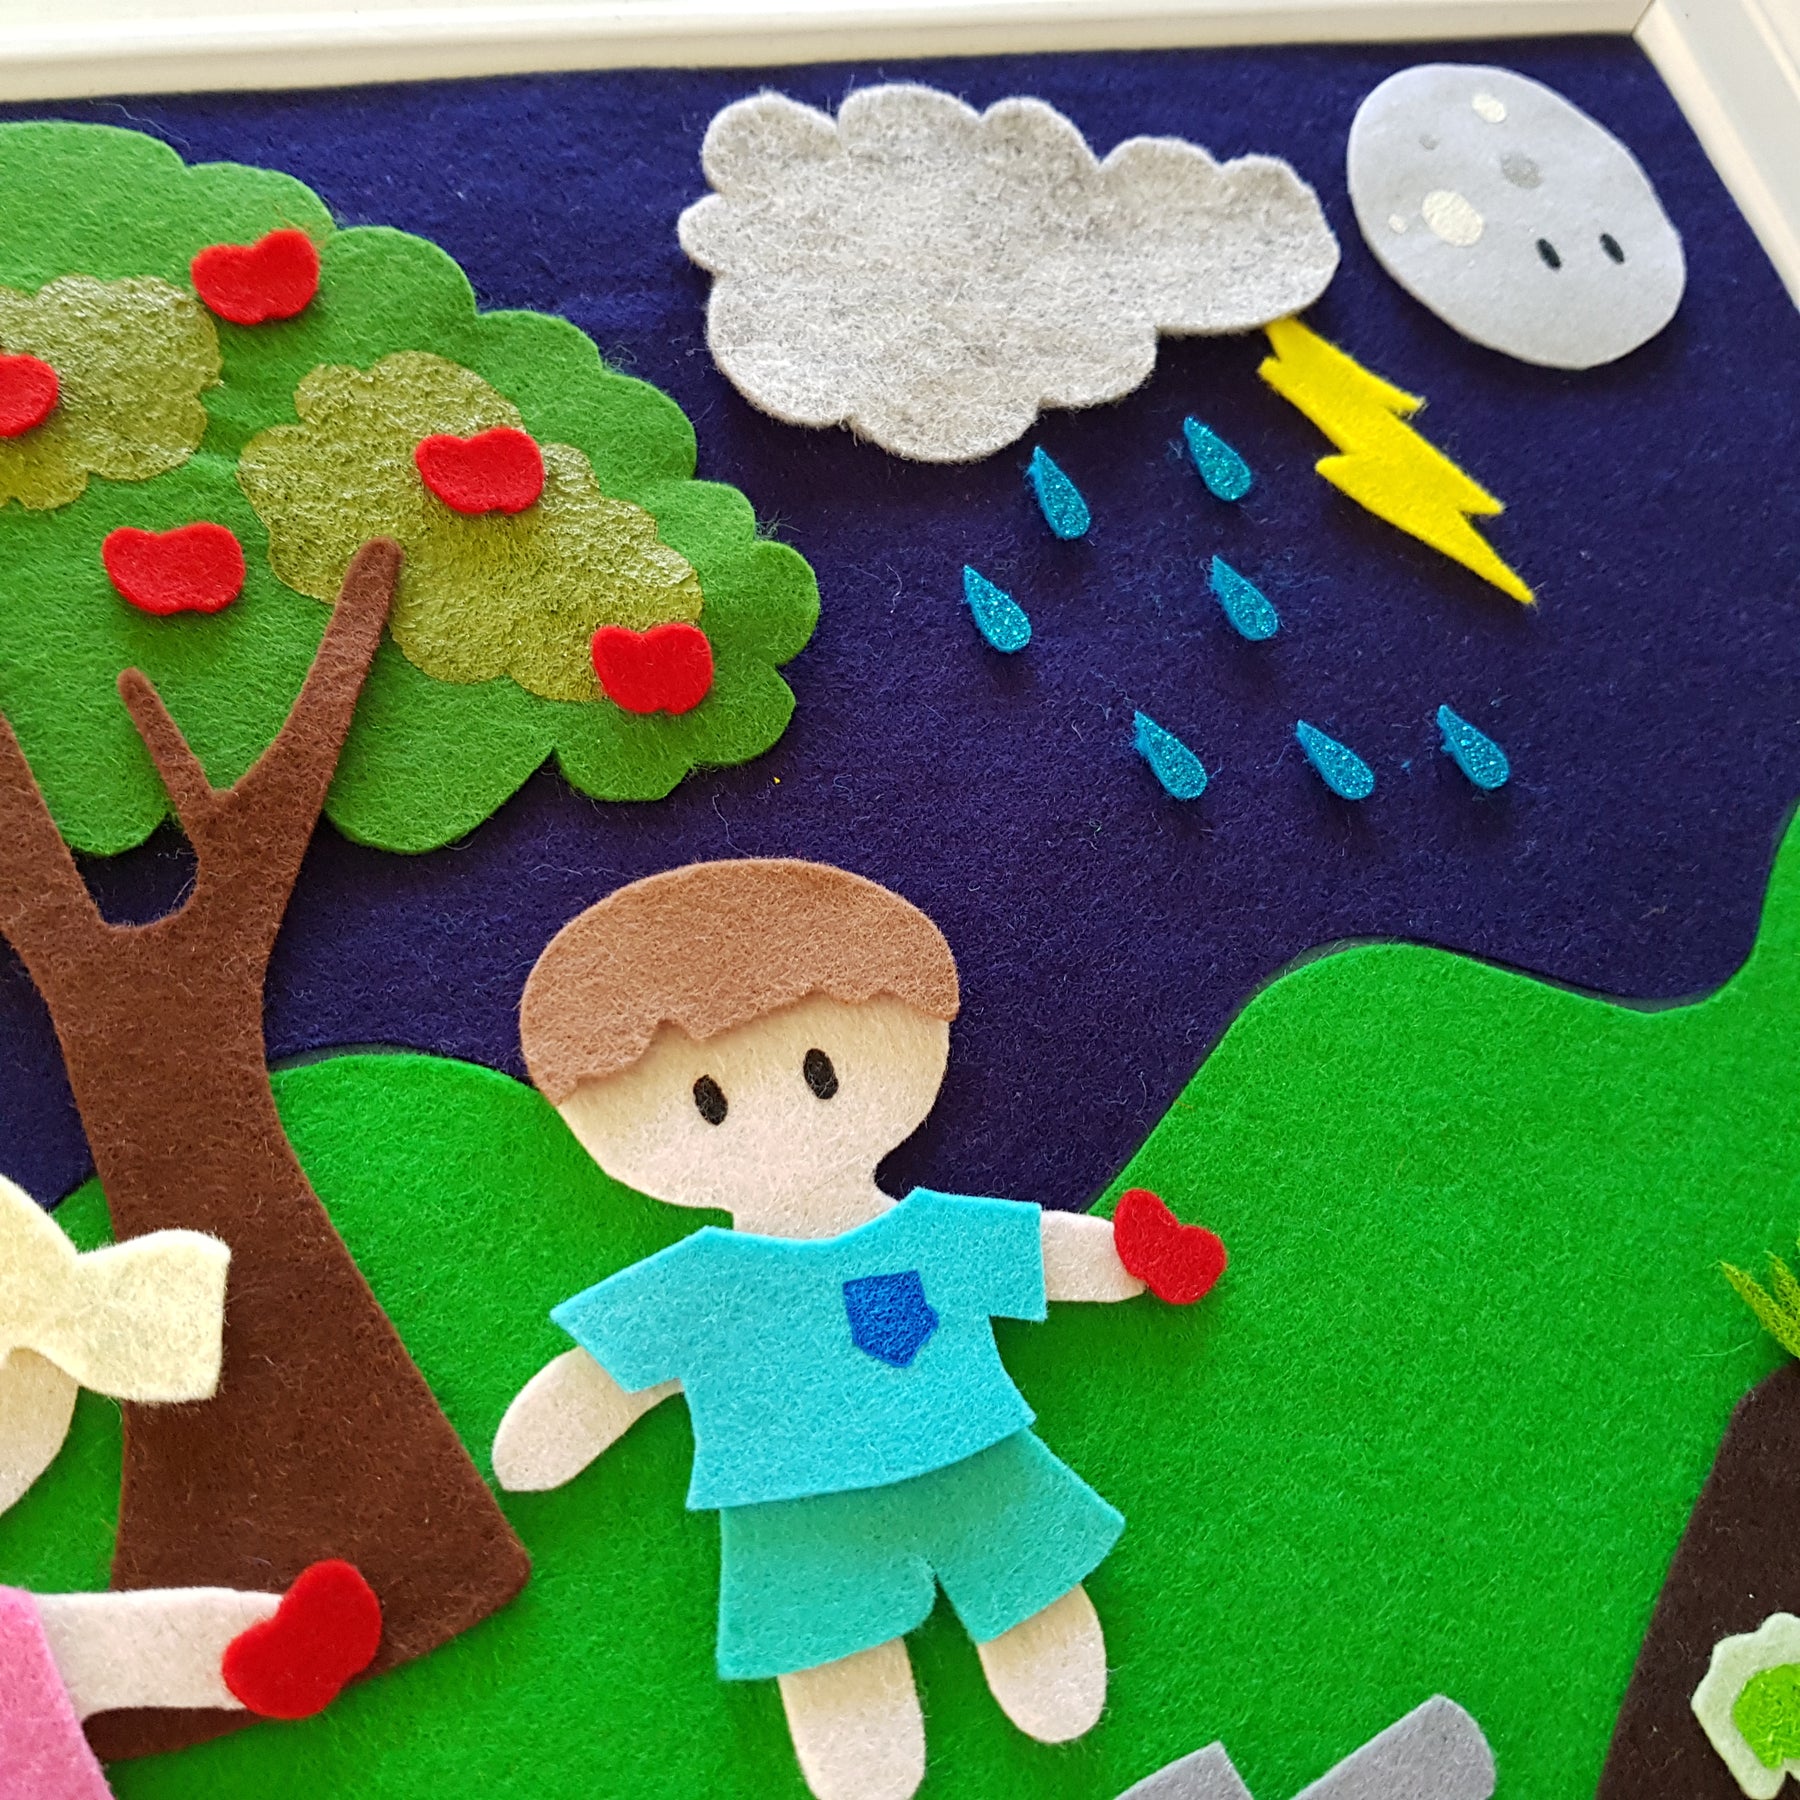 Revealing My Very First Pattern With One Thimble - The Felt Activity Board